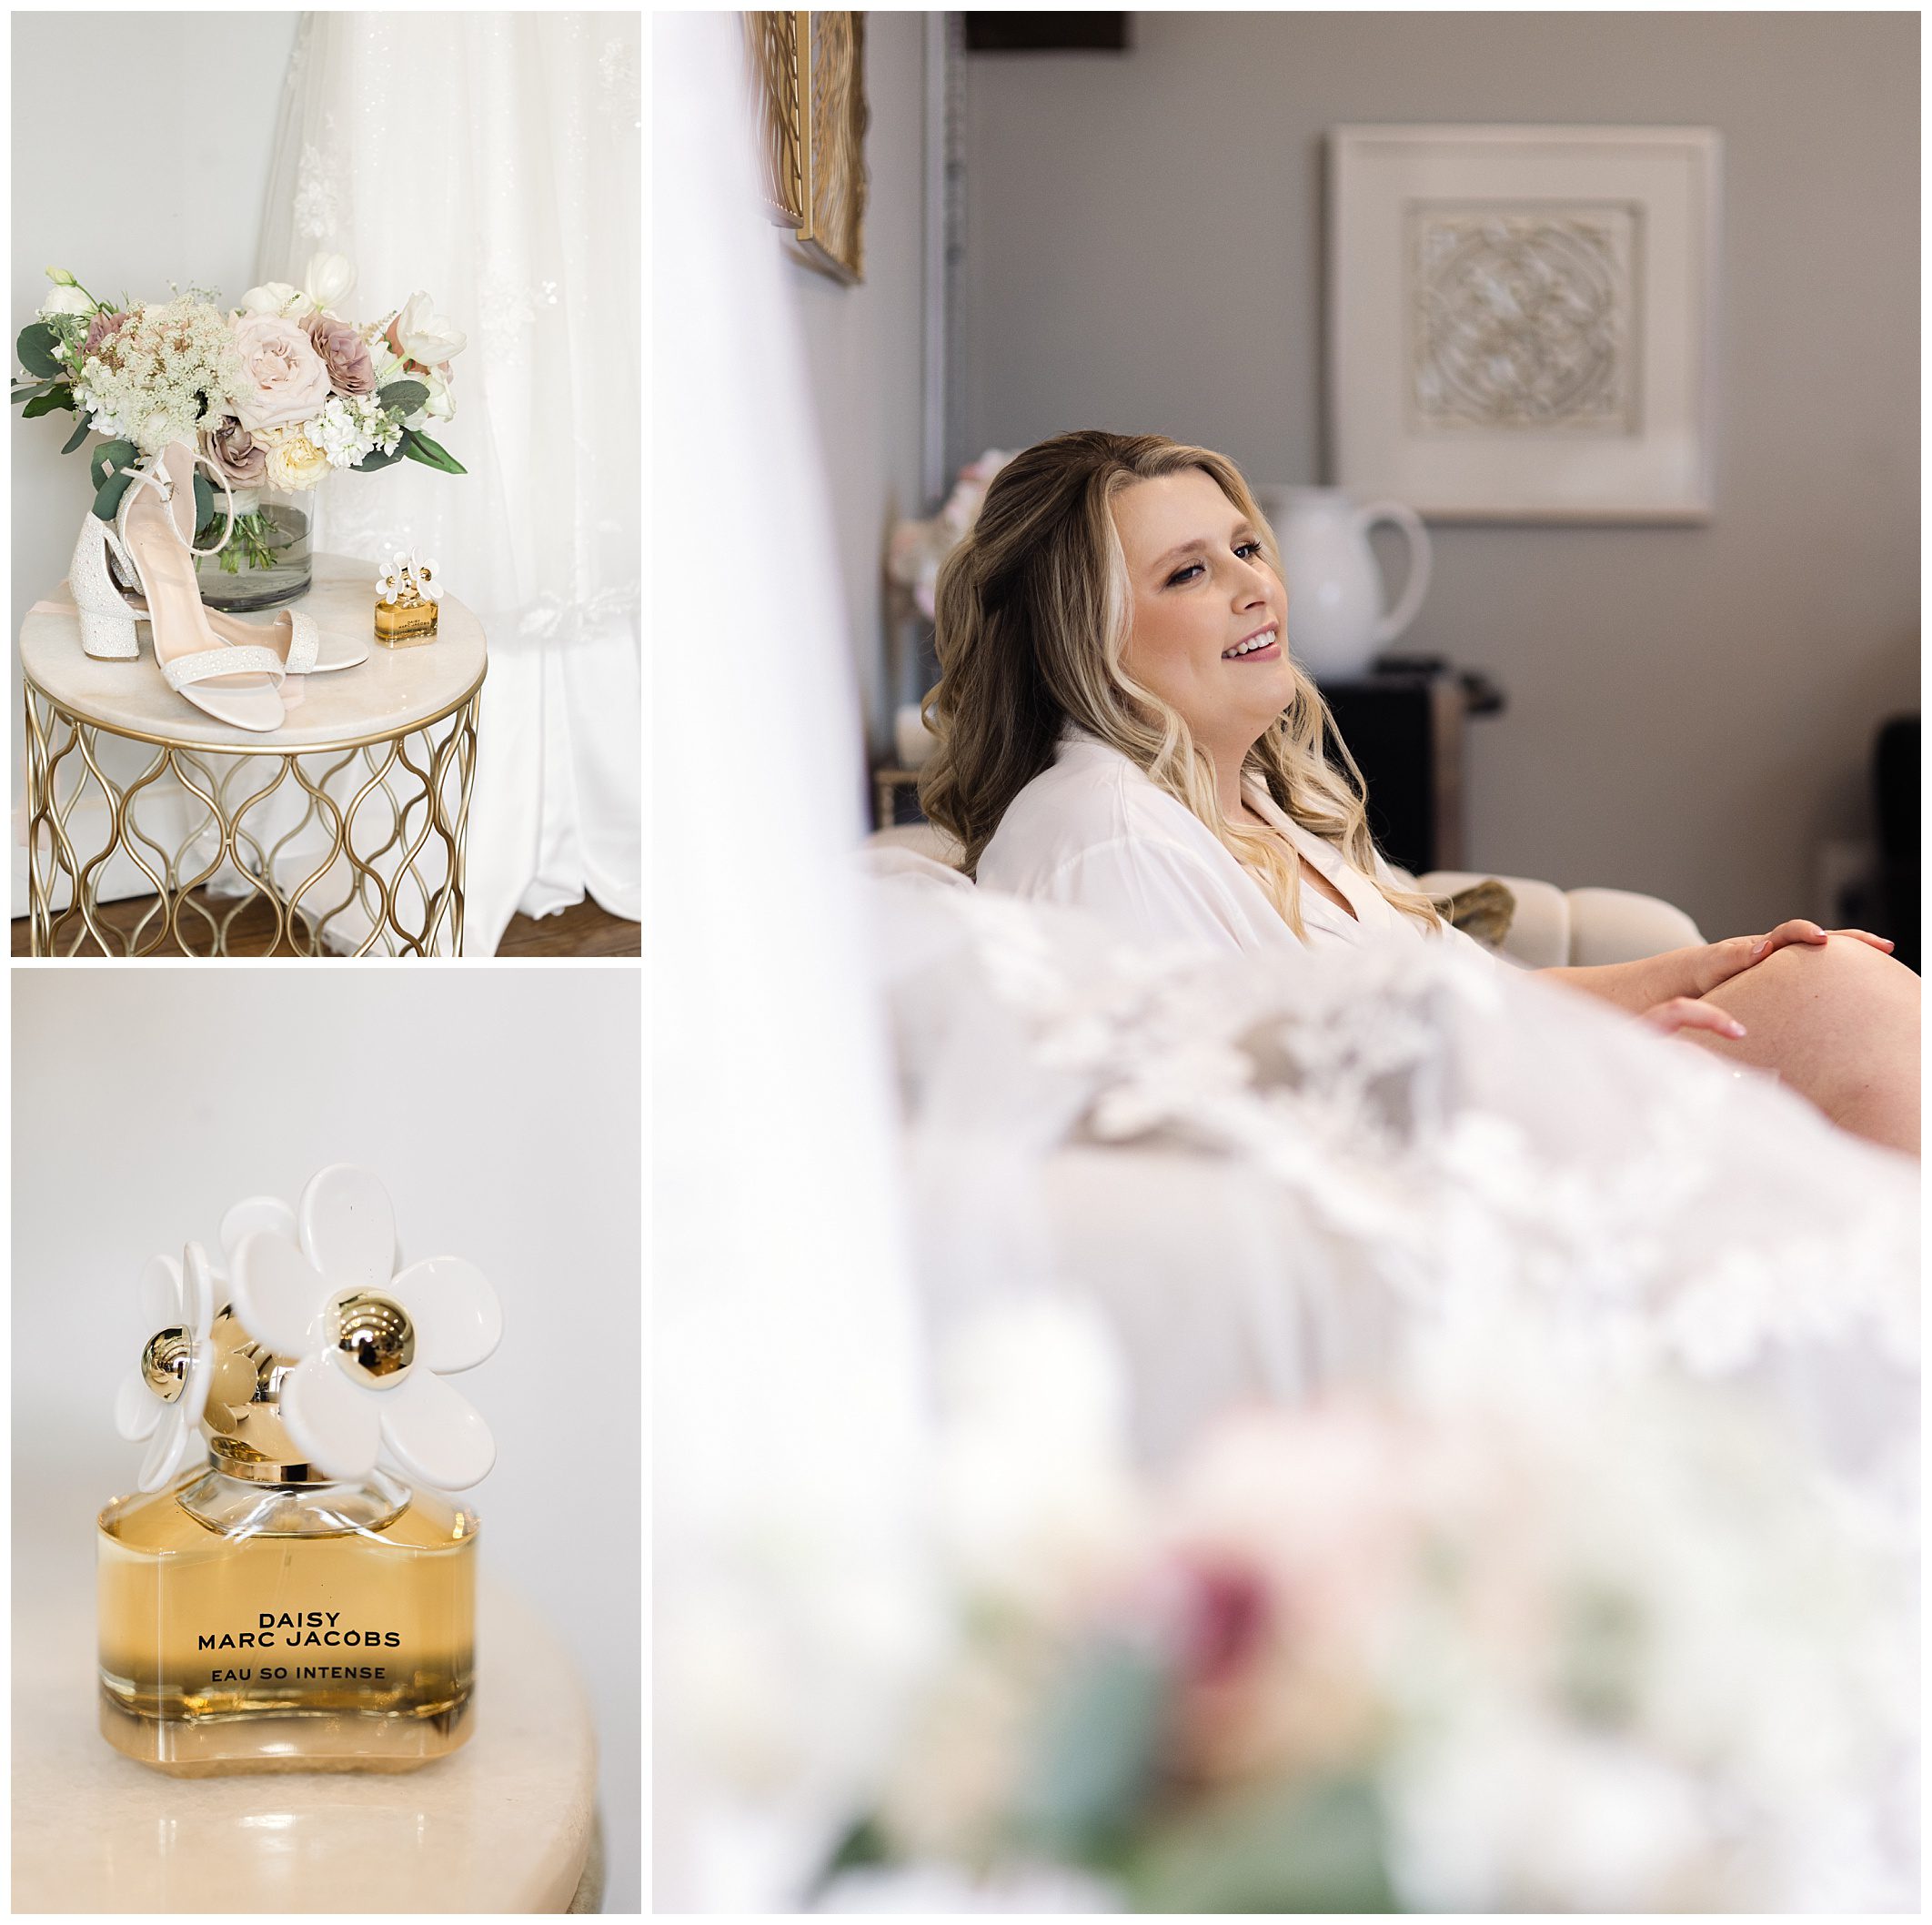 Collage of a bride relaxing at a mountain wedding, wedding shoes beside a bouquet, and a bottle of Marc Jacobs perfume.